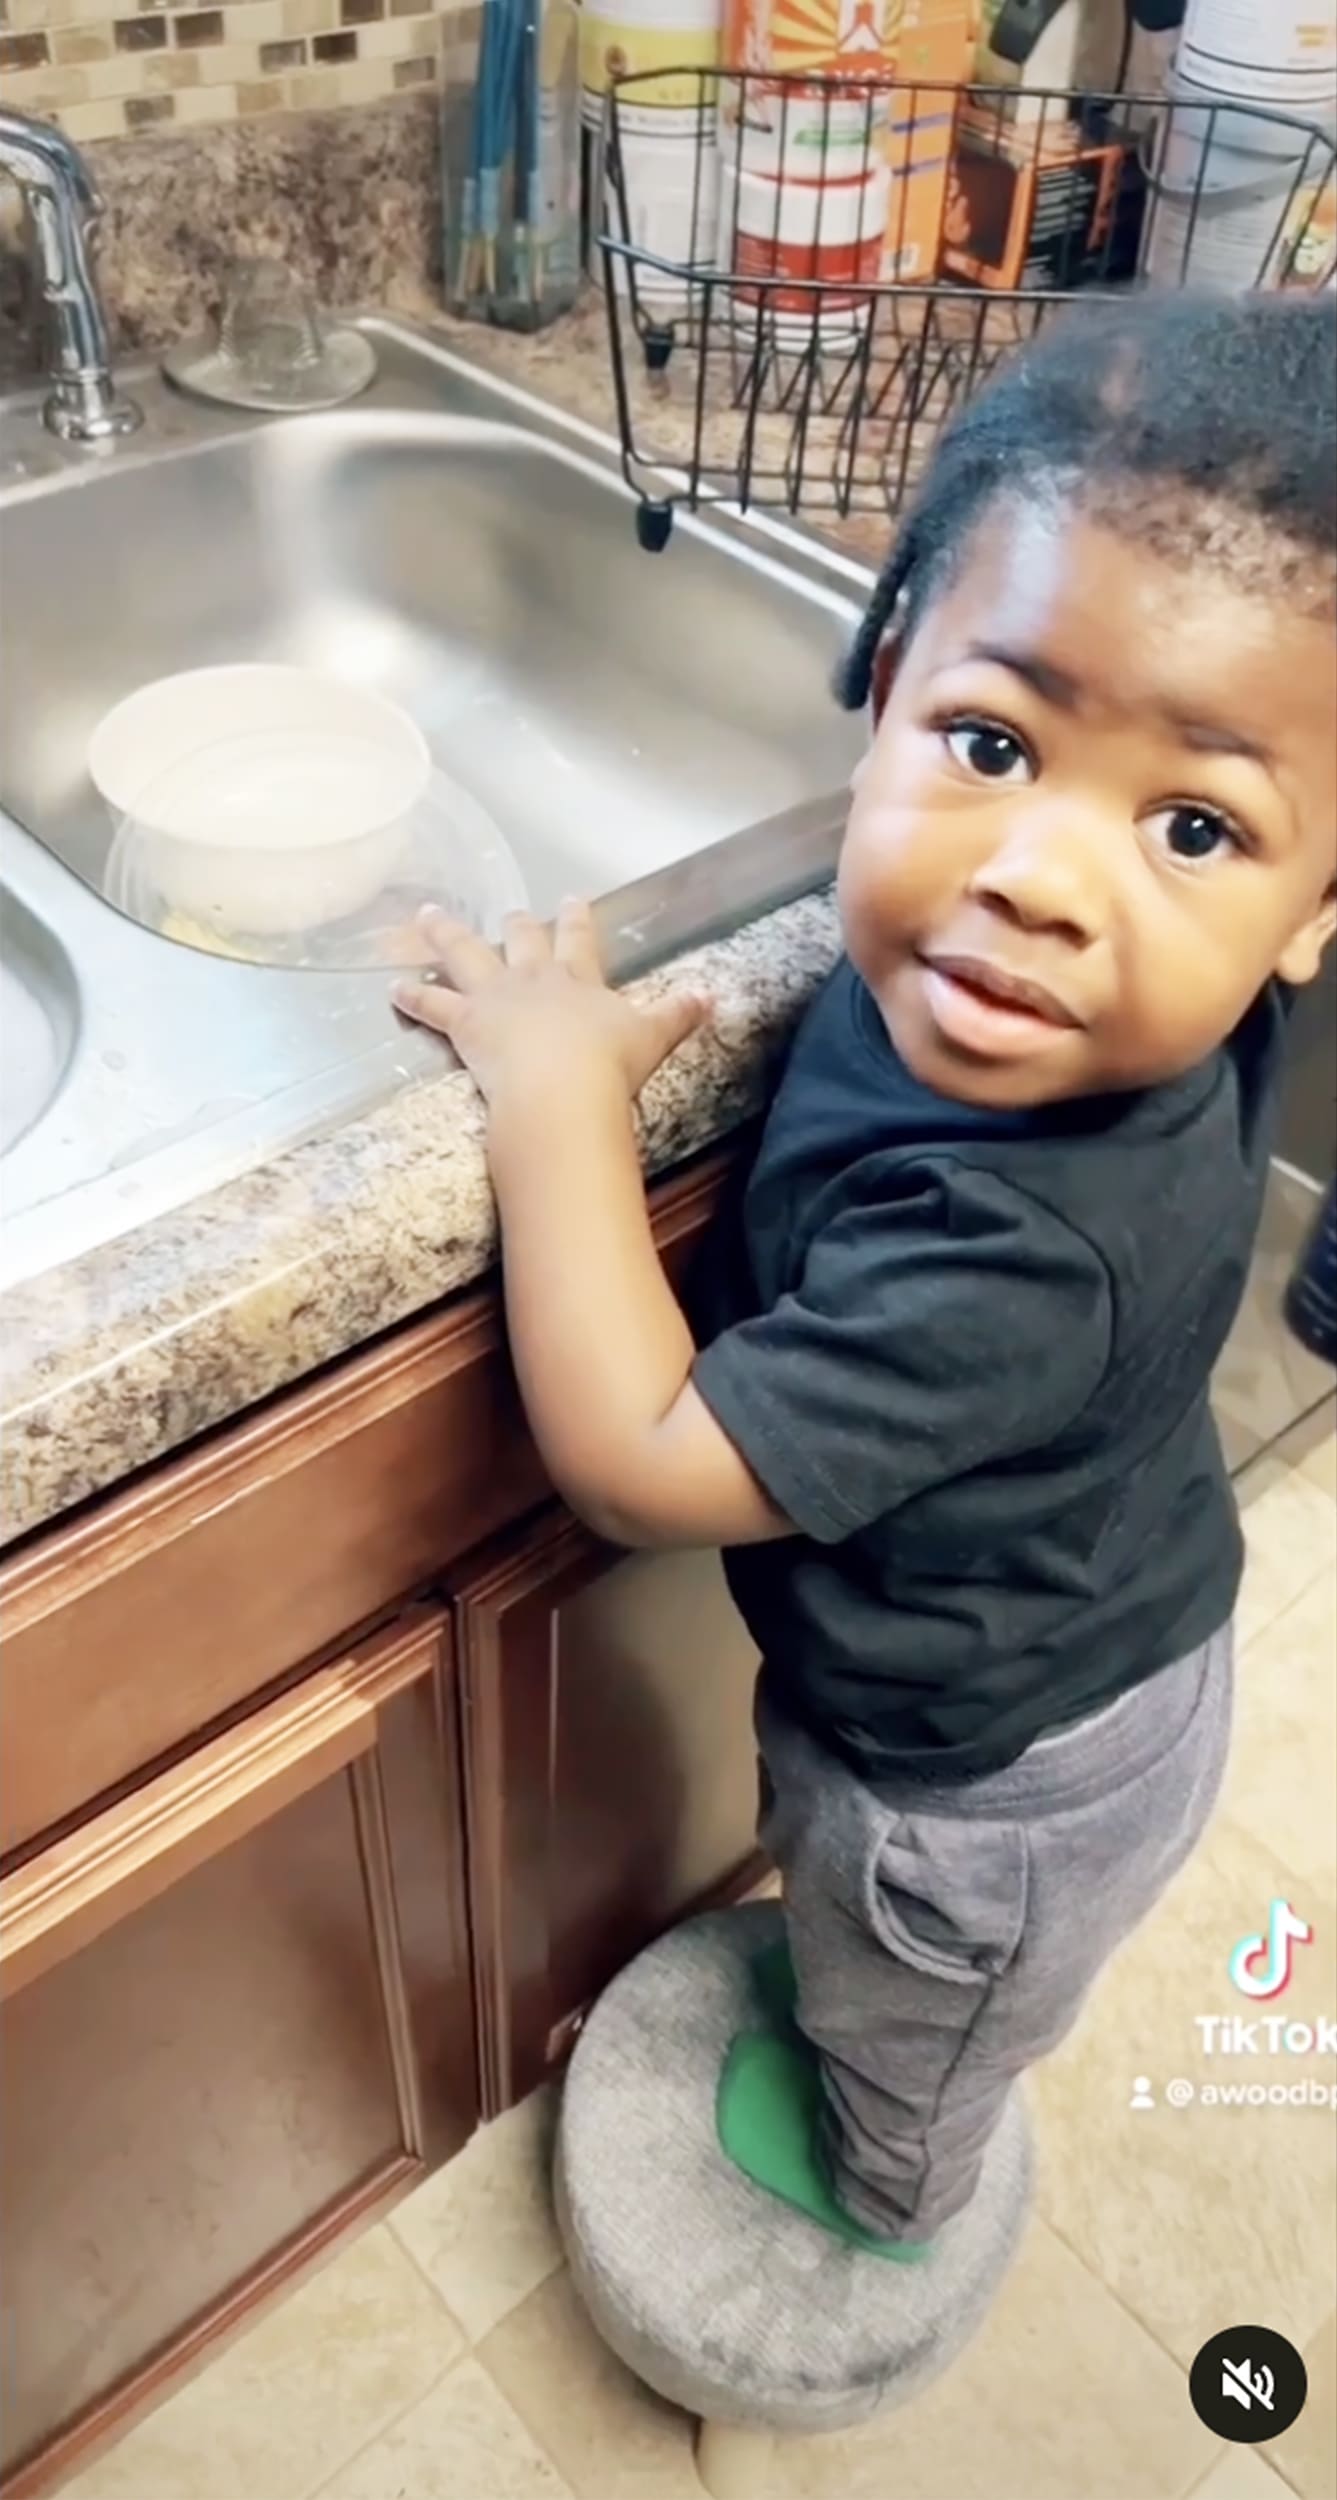 Toddler Makes Mess Washing Dishes And Has Funny Response